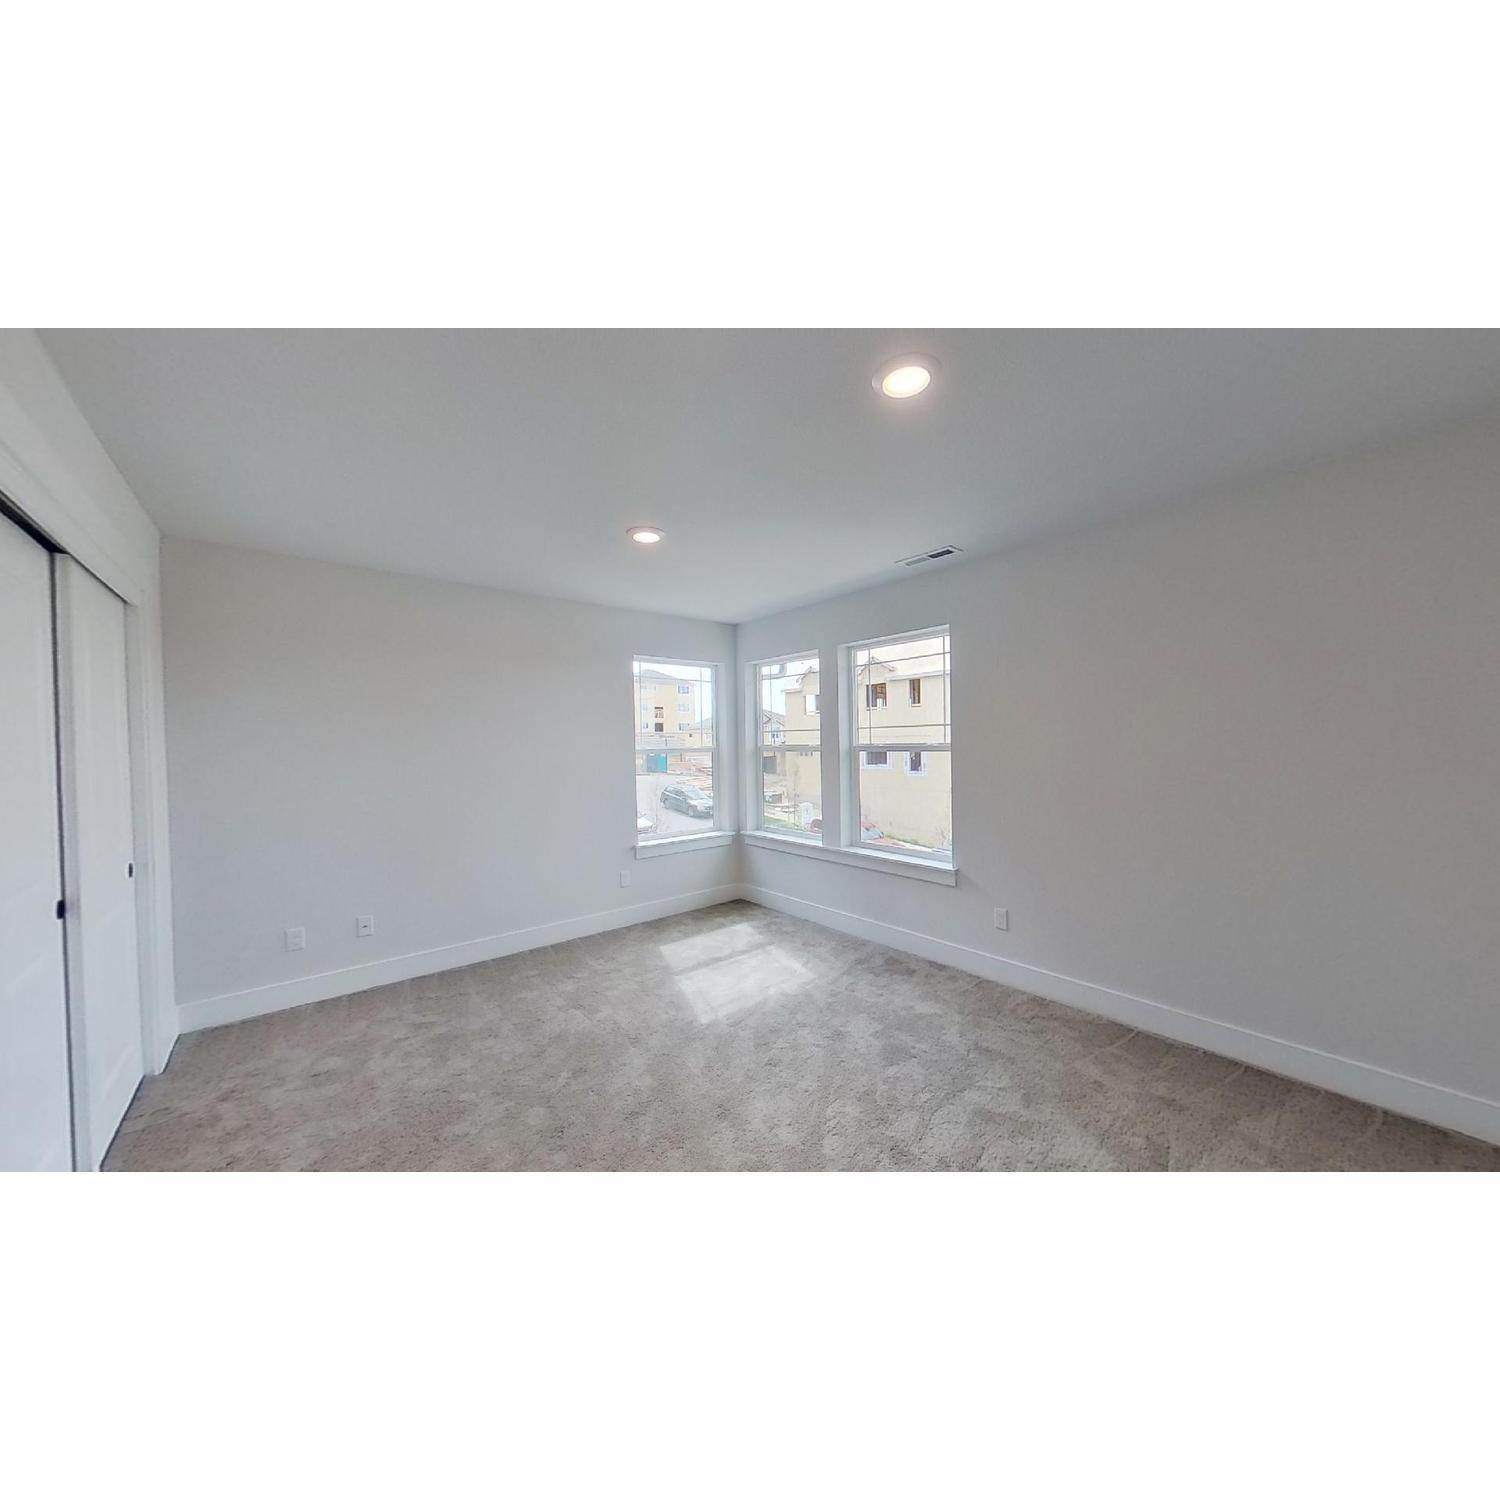 34. 16786 SW Leaf Lane, Tigard, OR 97224에 South River Terrace Innovate Condominiums 건물